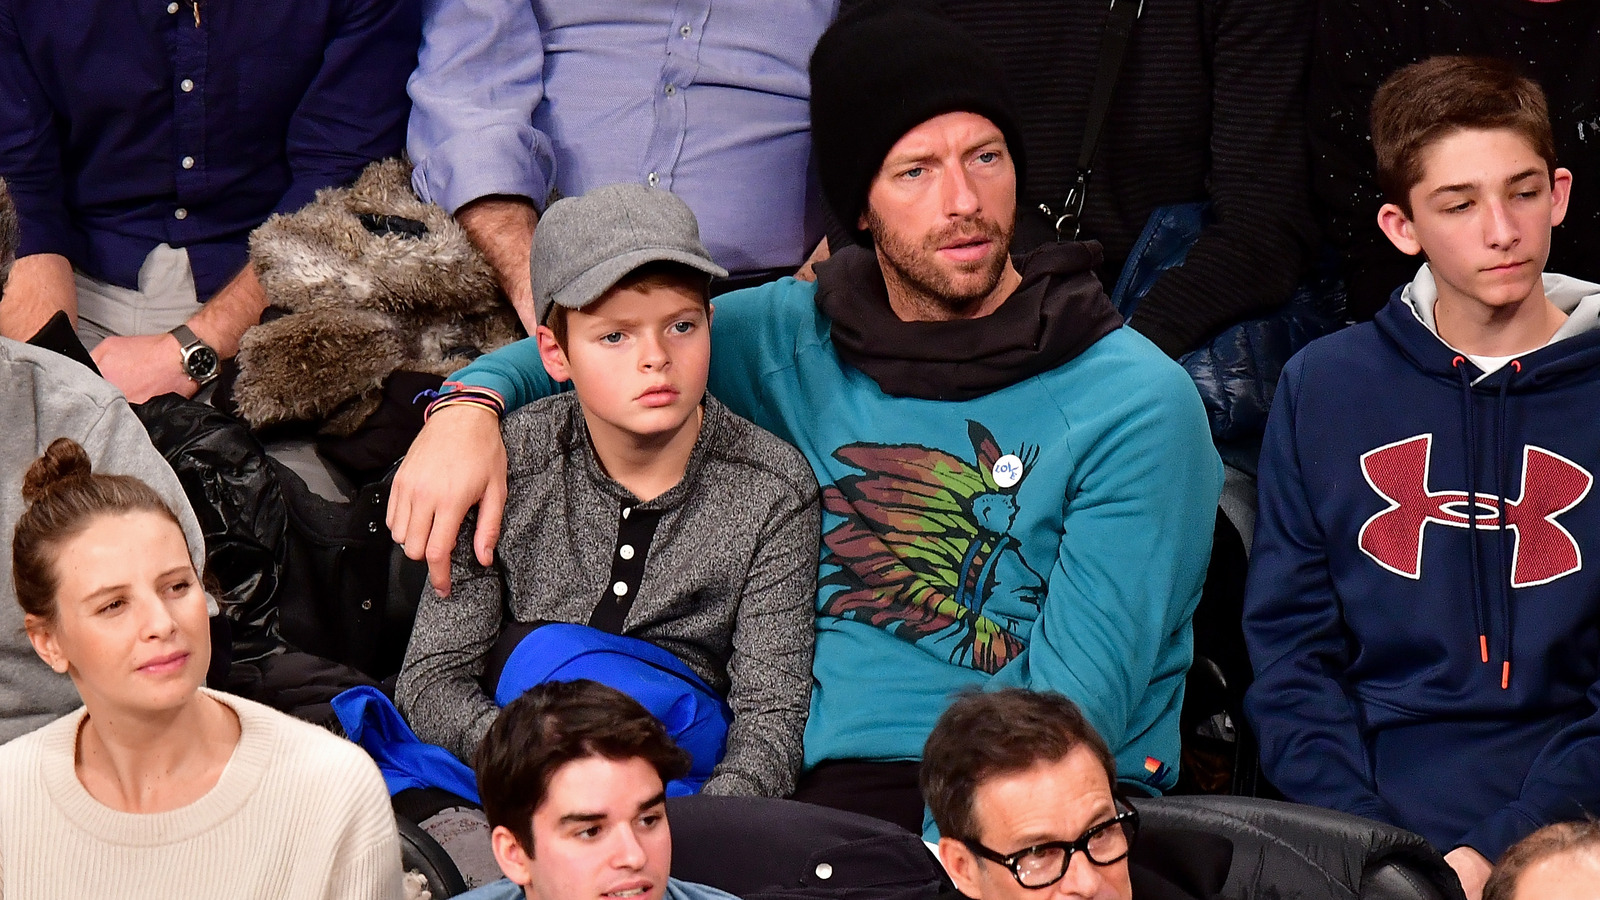 Gwyneth Paltrow's Son Moses Is All Grown Up & A Clone Of His Dad Chris Martin